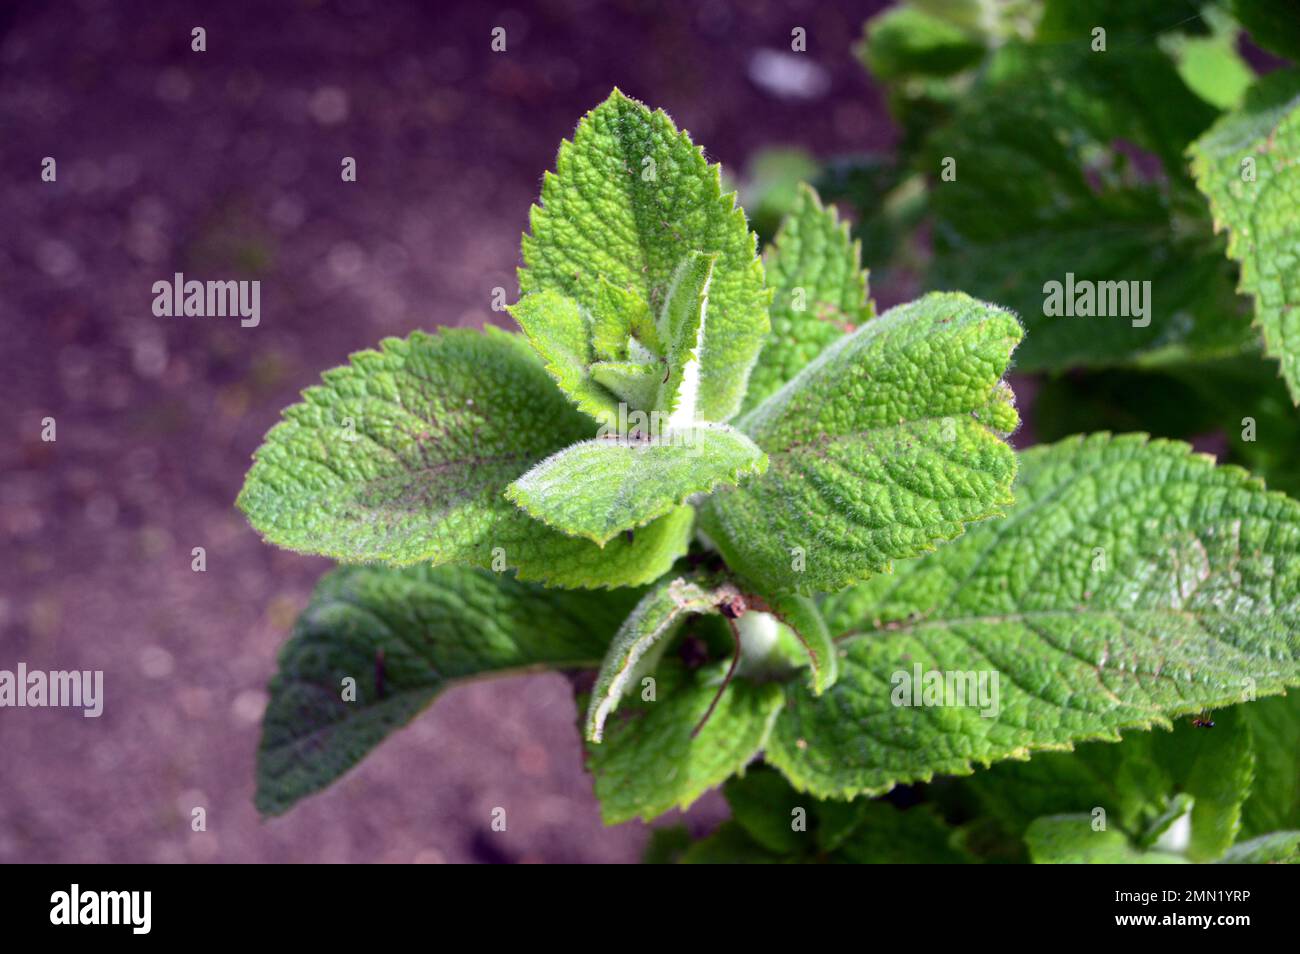 Apple Mint Leaves (Mentha Suaveolens) grown in a Raised Bed in the Herb Garden at RHS Garden, Harlow Carr, Harrogate, Yorkshire. UK. Stock Photo